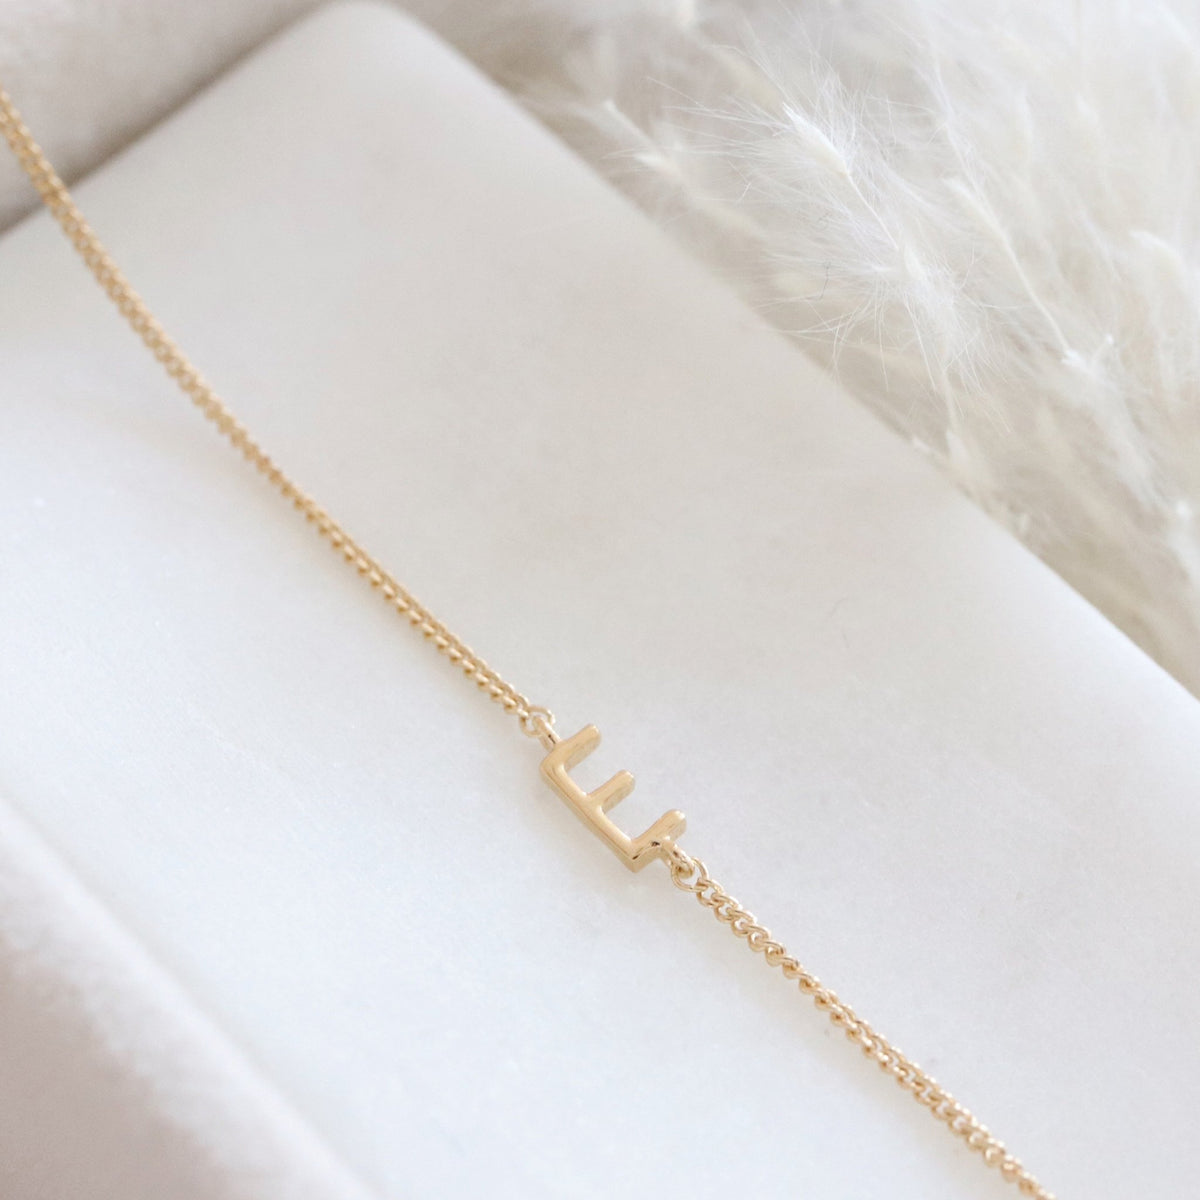 NOTABLE OFFSET INITIAL NECKLACE - E - GOLD - SO PRETTY CARA COTTER